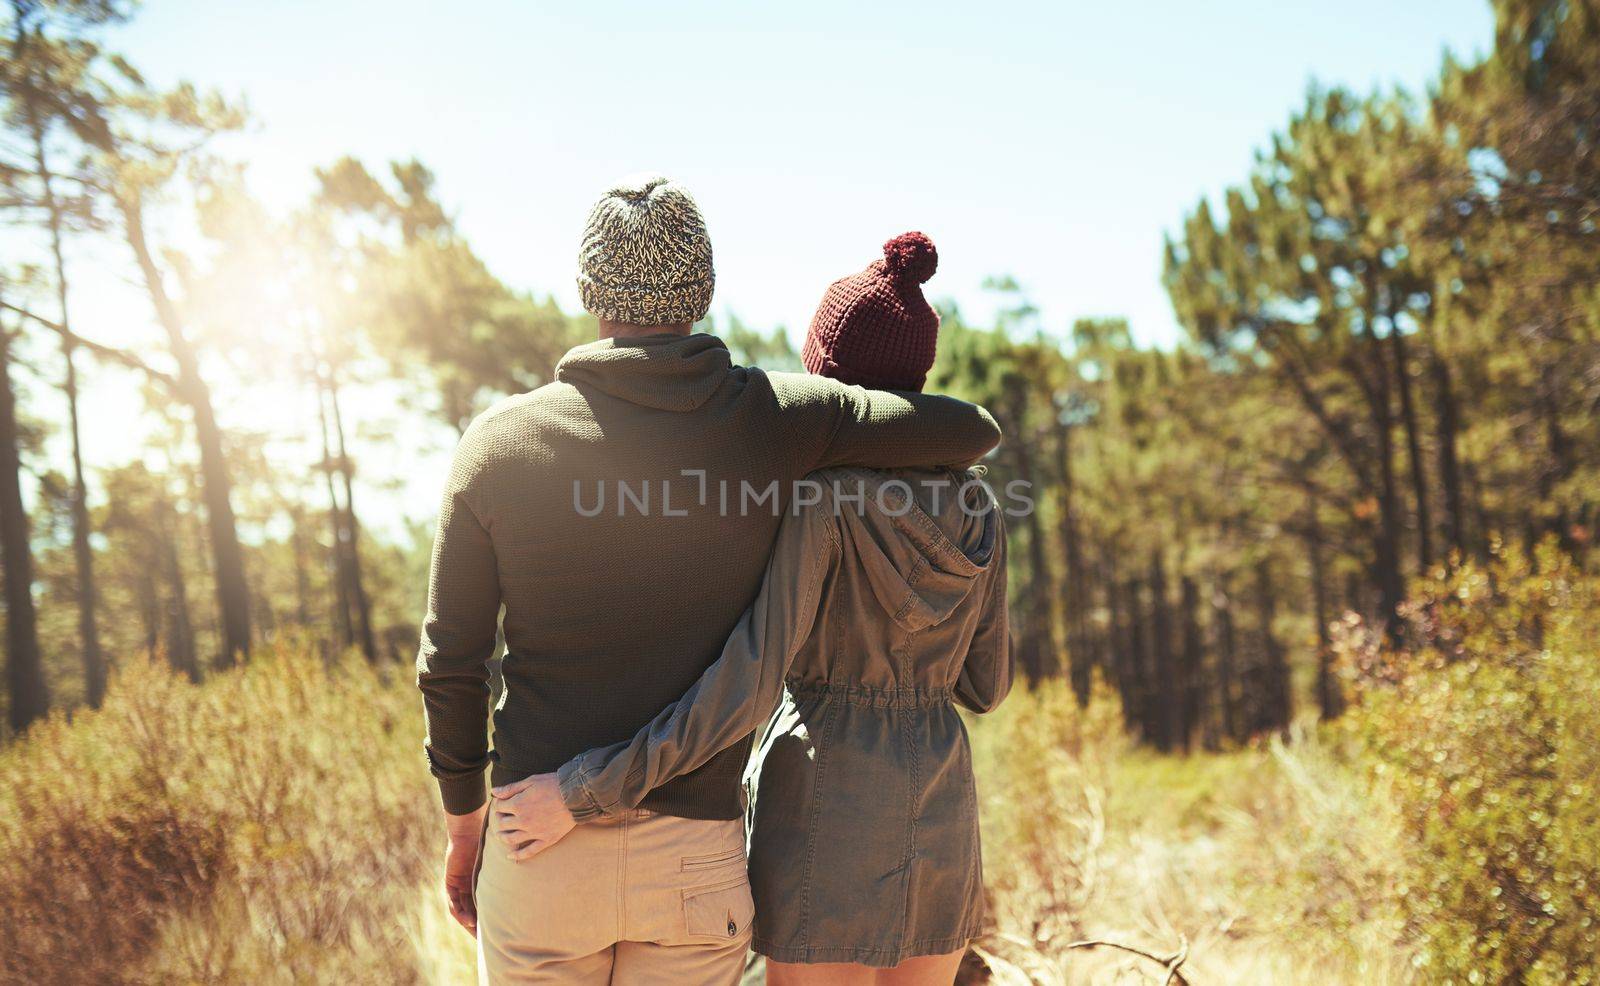 Out exploring the beauty in nature. Rearview shot of an affectionate young couple hiking